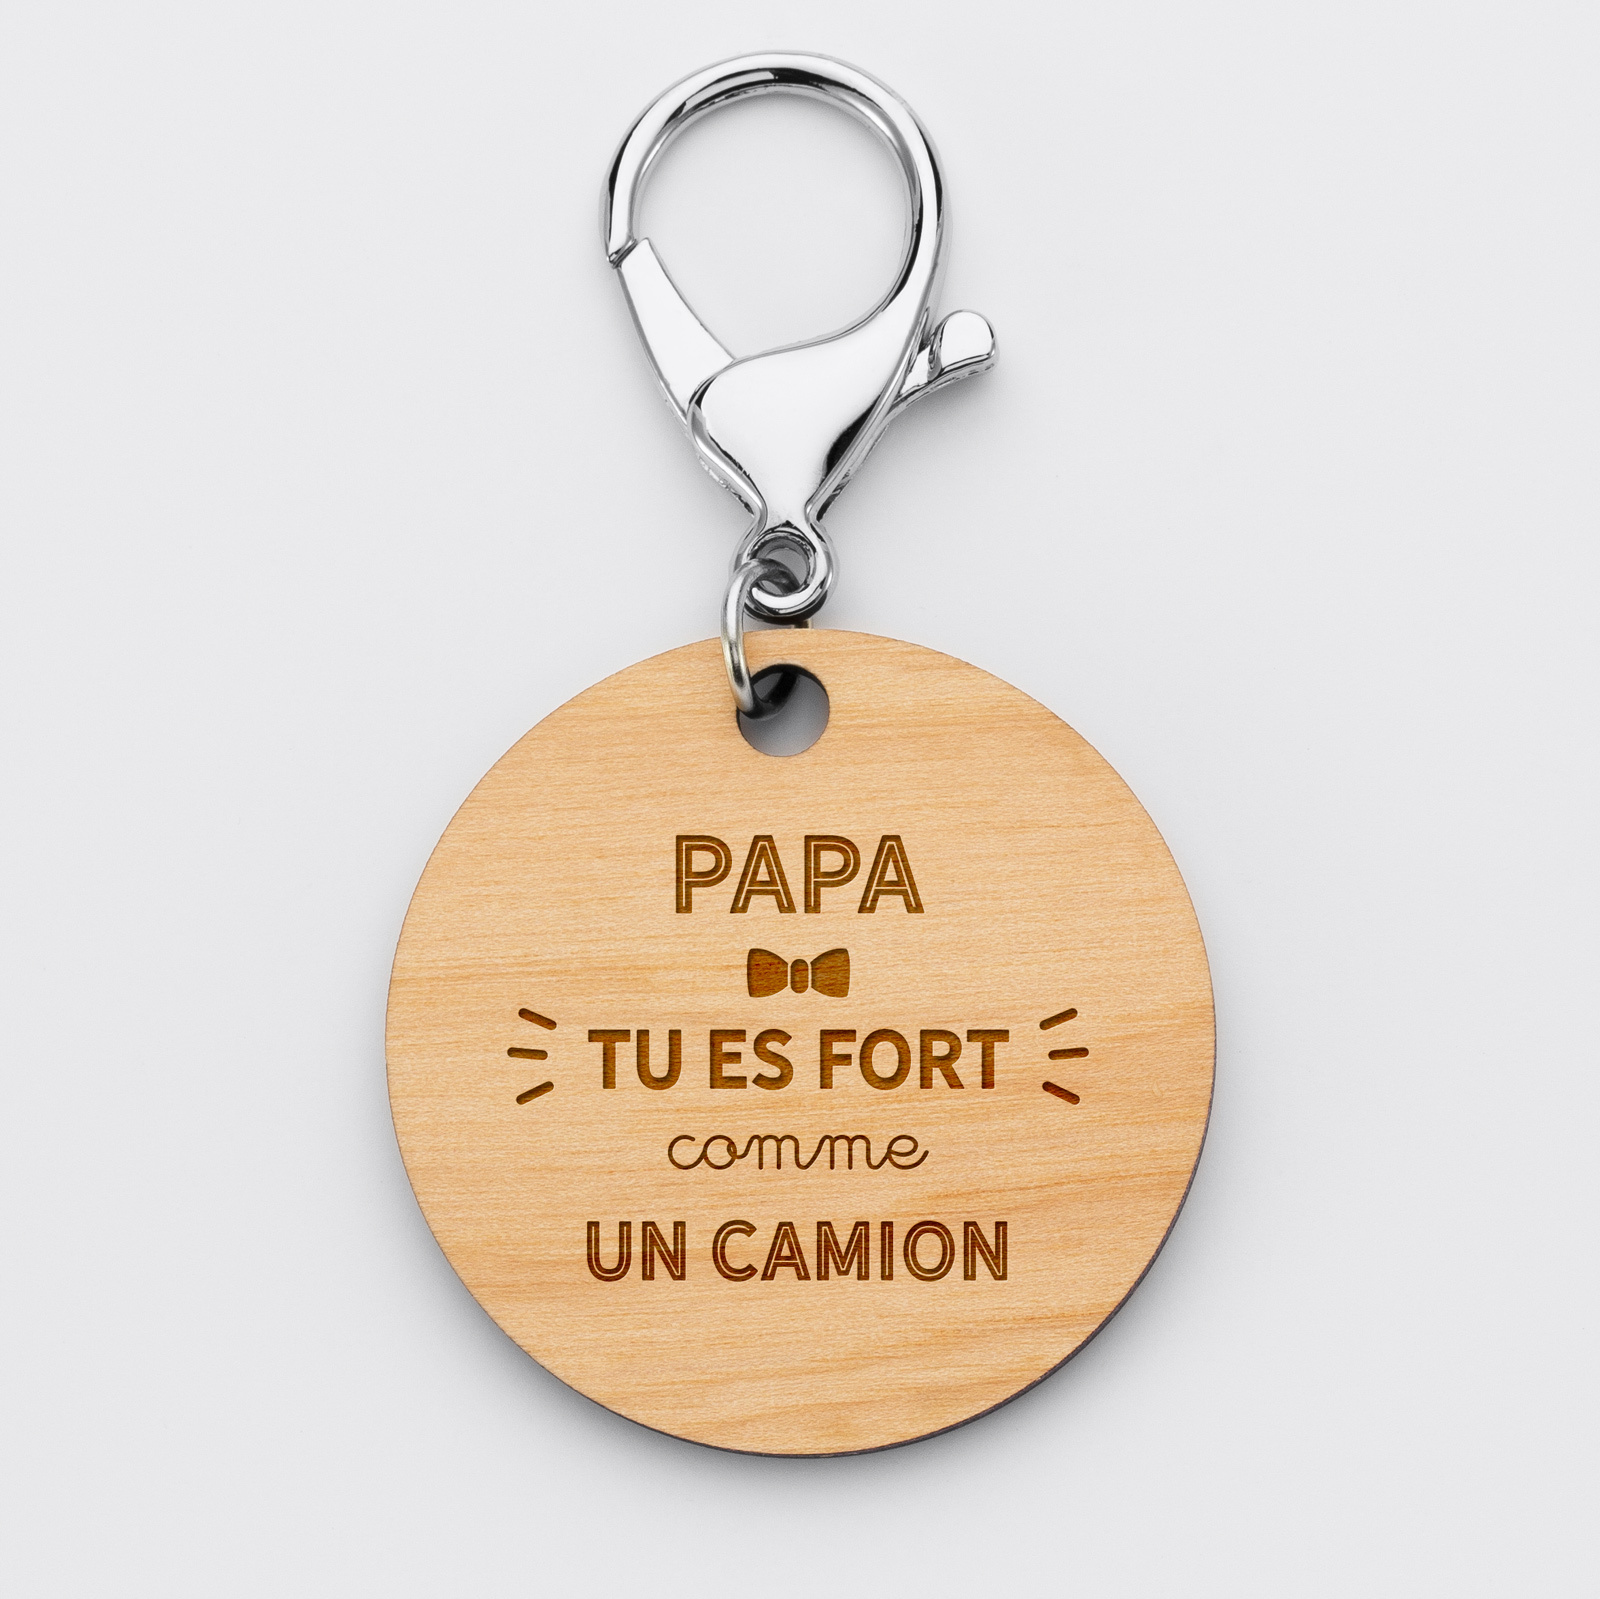 Personalised engraved wooden "Papa tu es fort" special edition round medallion keyring 50mm